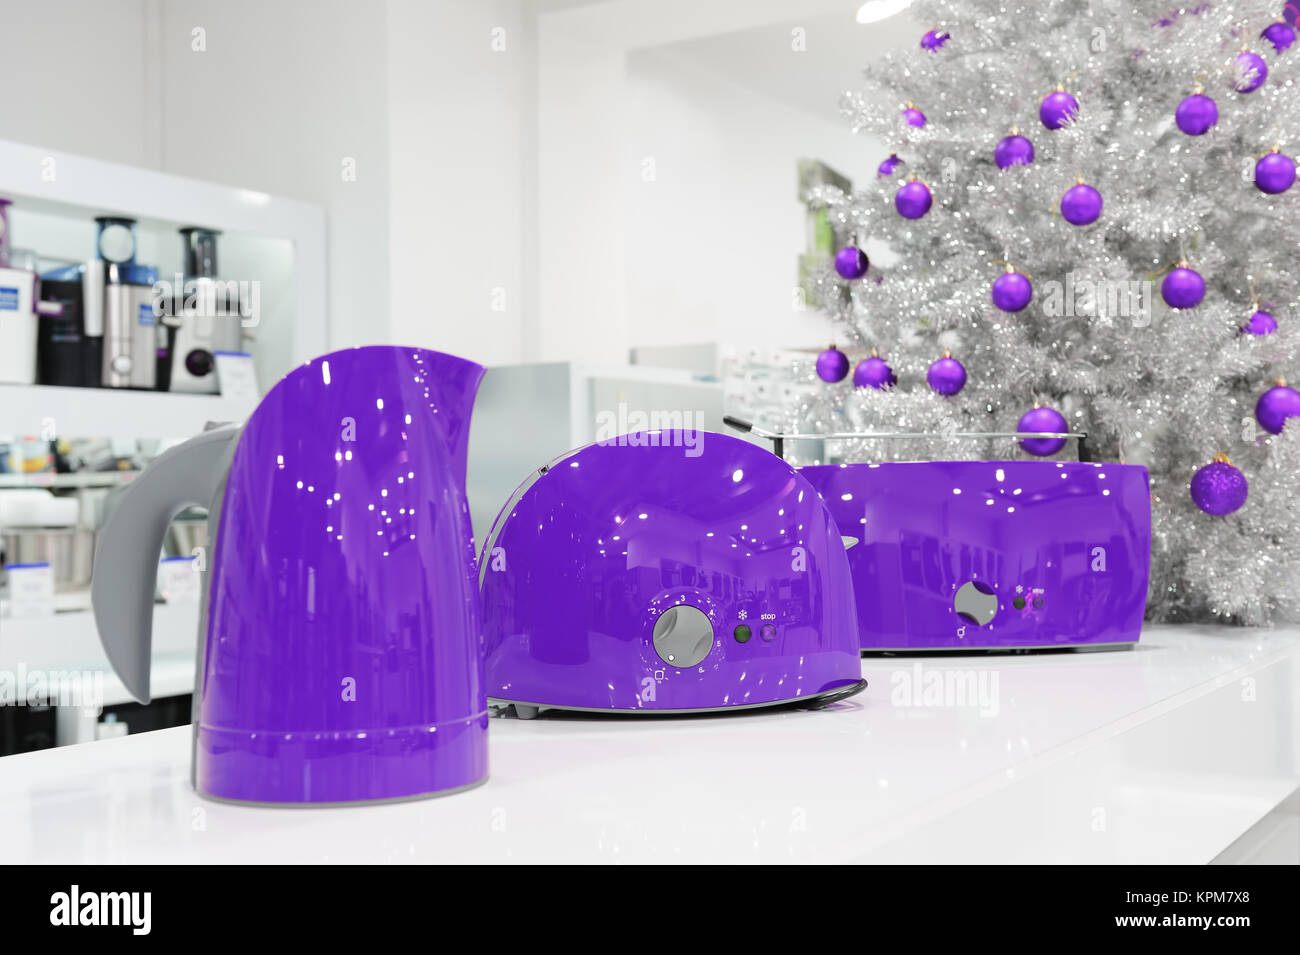 Ultraviolet home appliances store at Christmas Stock Photo